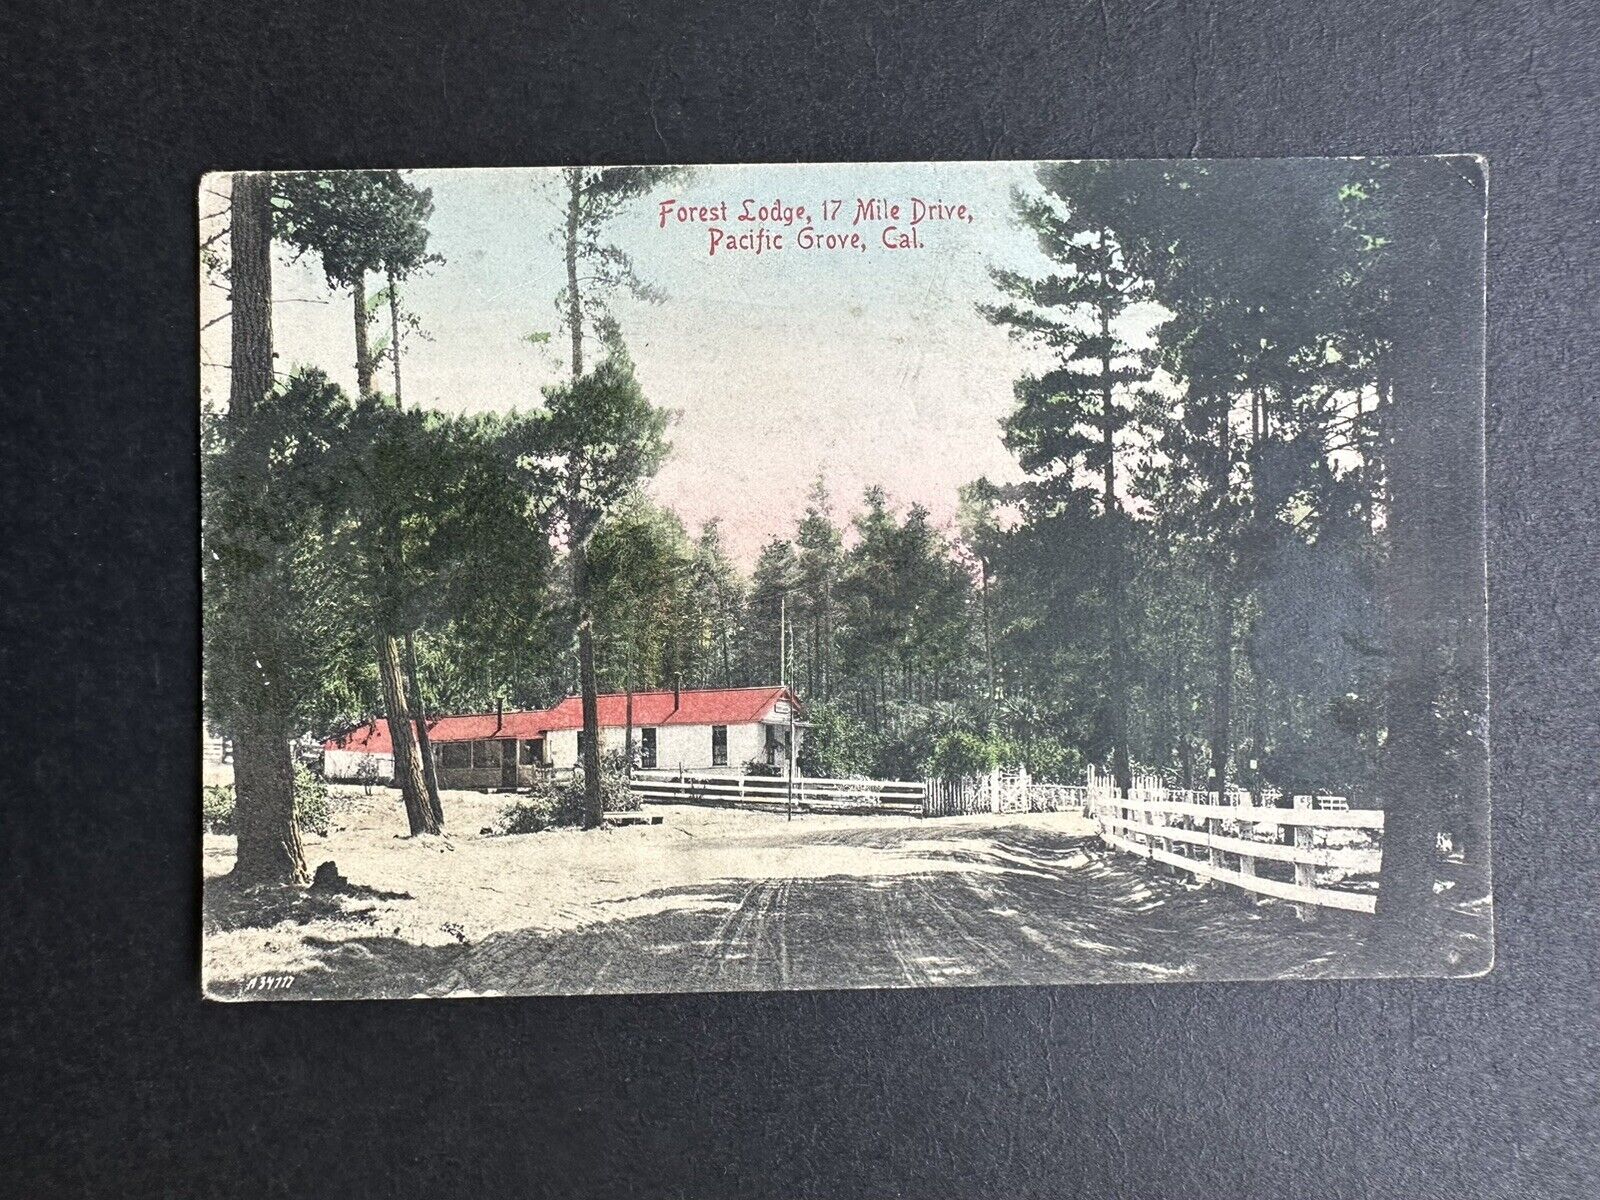 Postcard Forrest Lodge 27 Mile Drive Pacific Drive California House In Woods R25